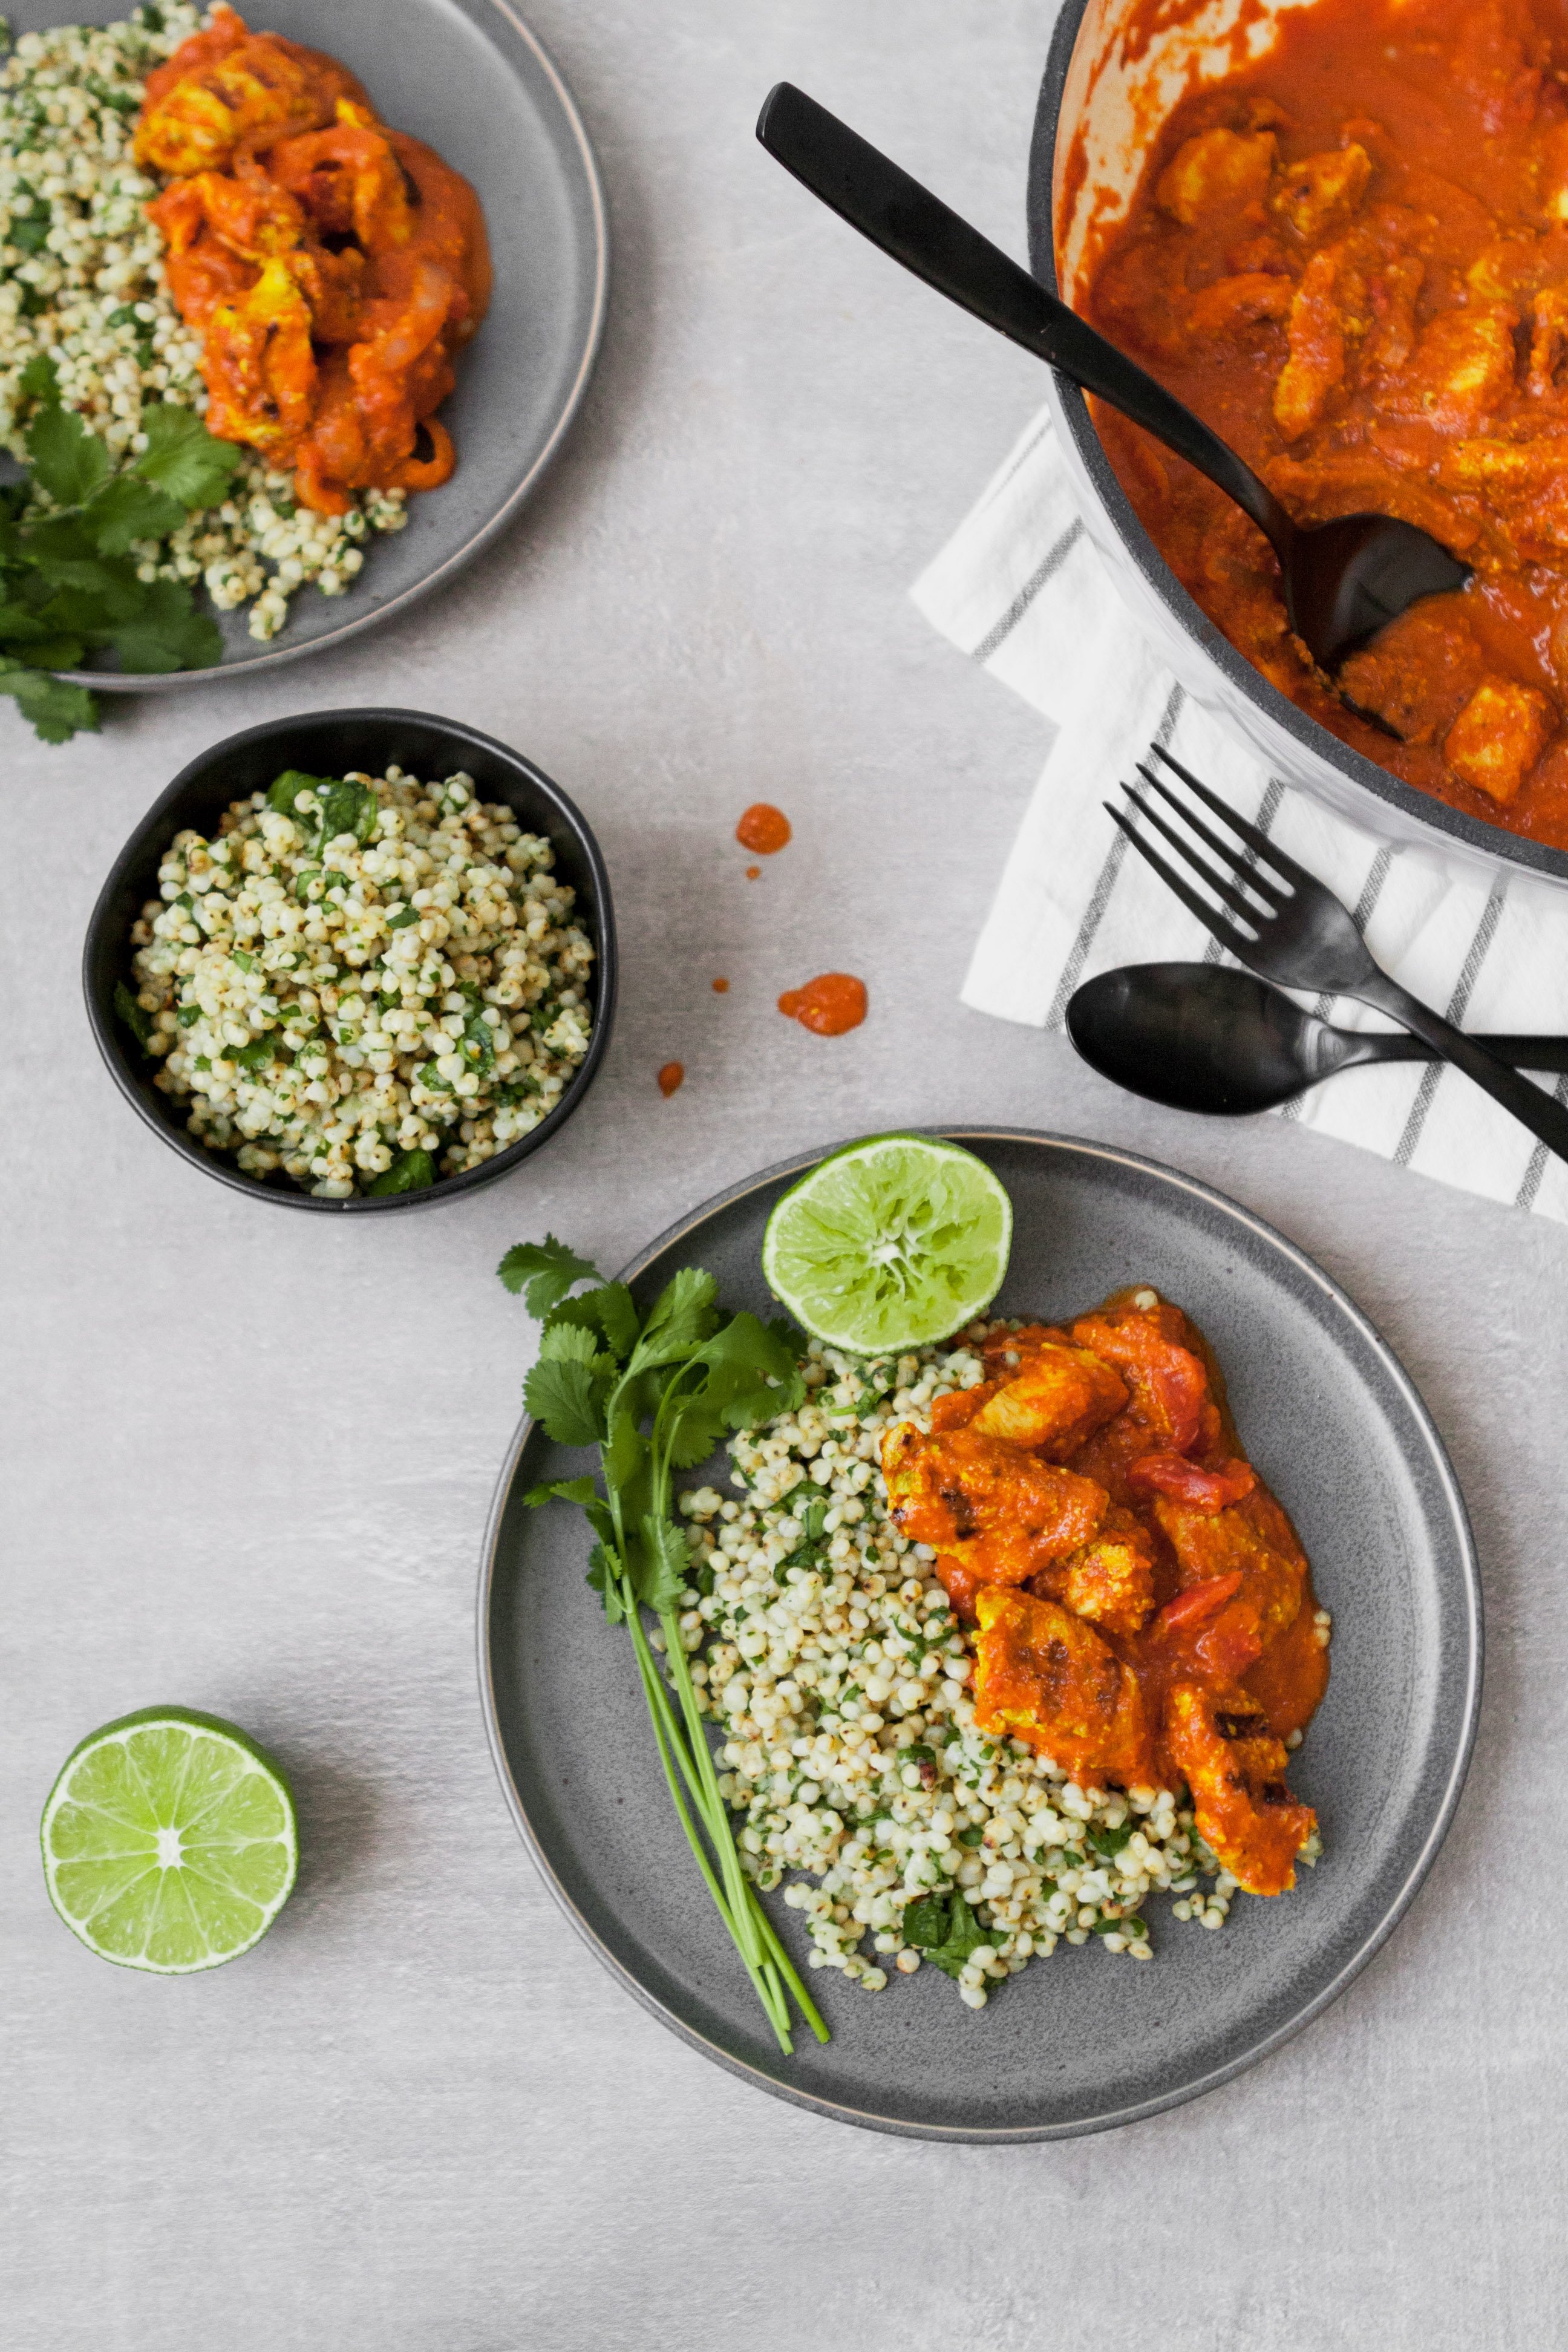 This Lightened Chicken Tikka Masala is full-flavored, healthy, and even a great make ahead meal. Atop a bed of cilantro-lime sorghum, this is classic, yet reinvented.  | from Lauren Grant of Zestful Kitchen